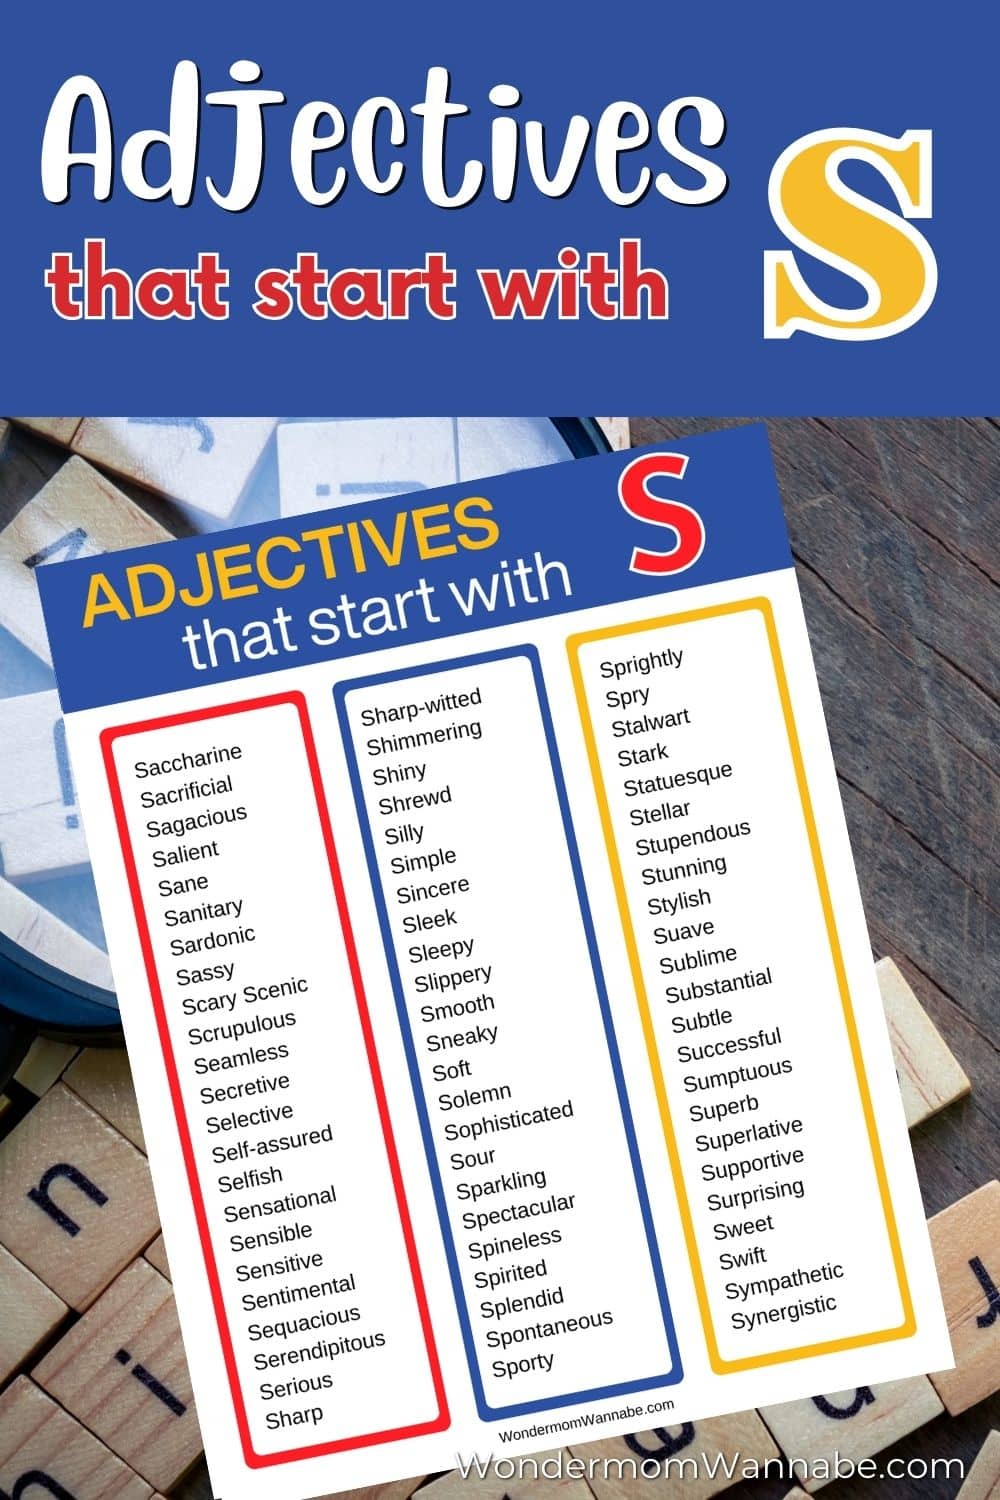 A list of adjectives that start with the letter s.